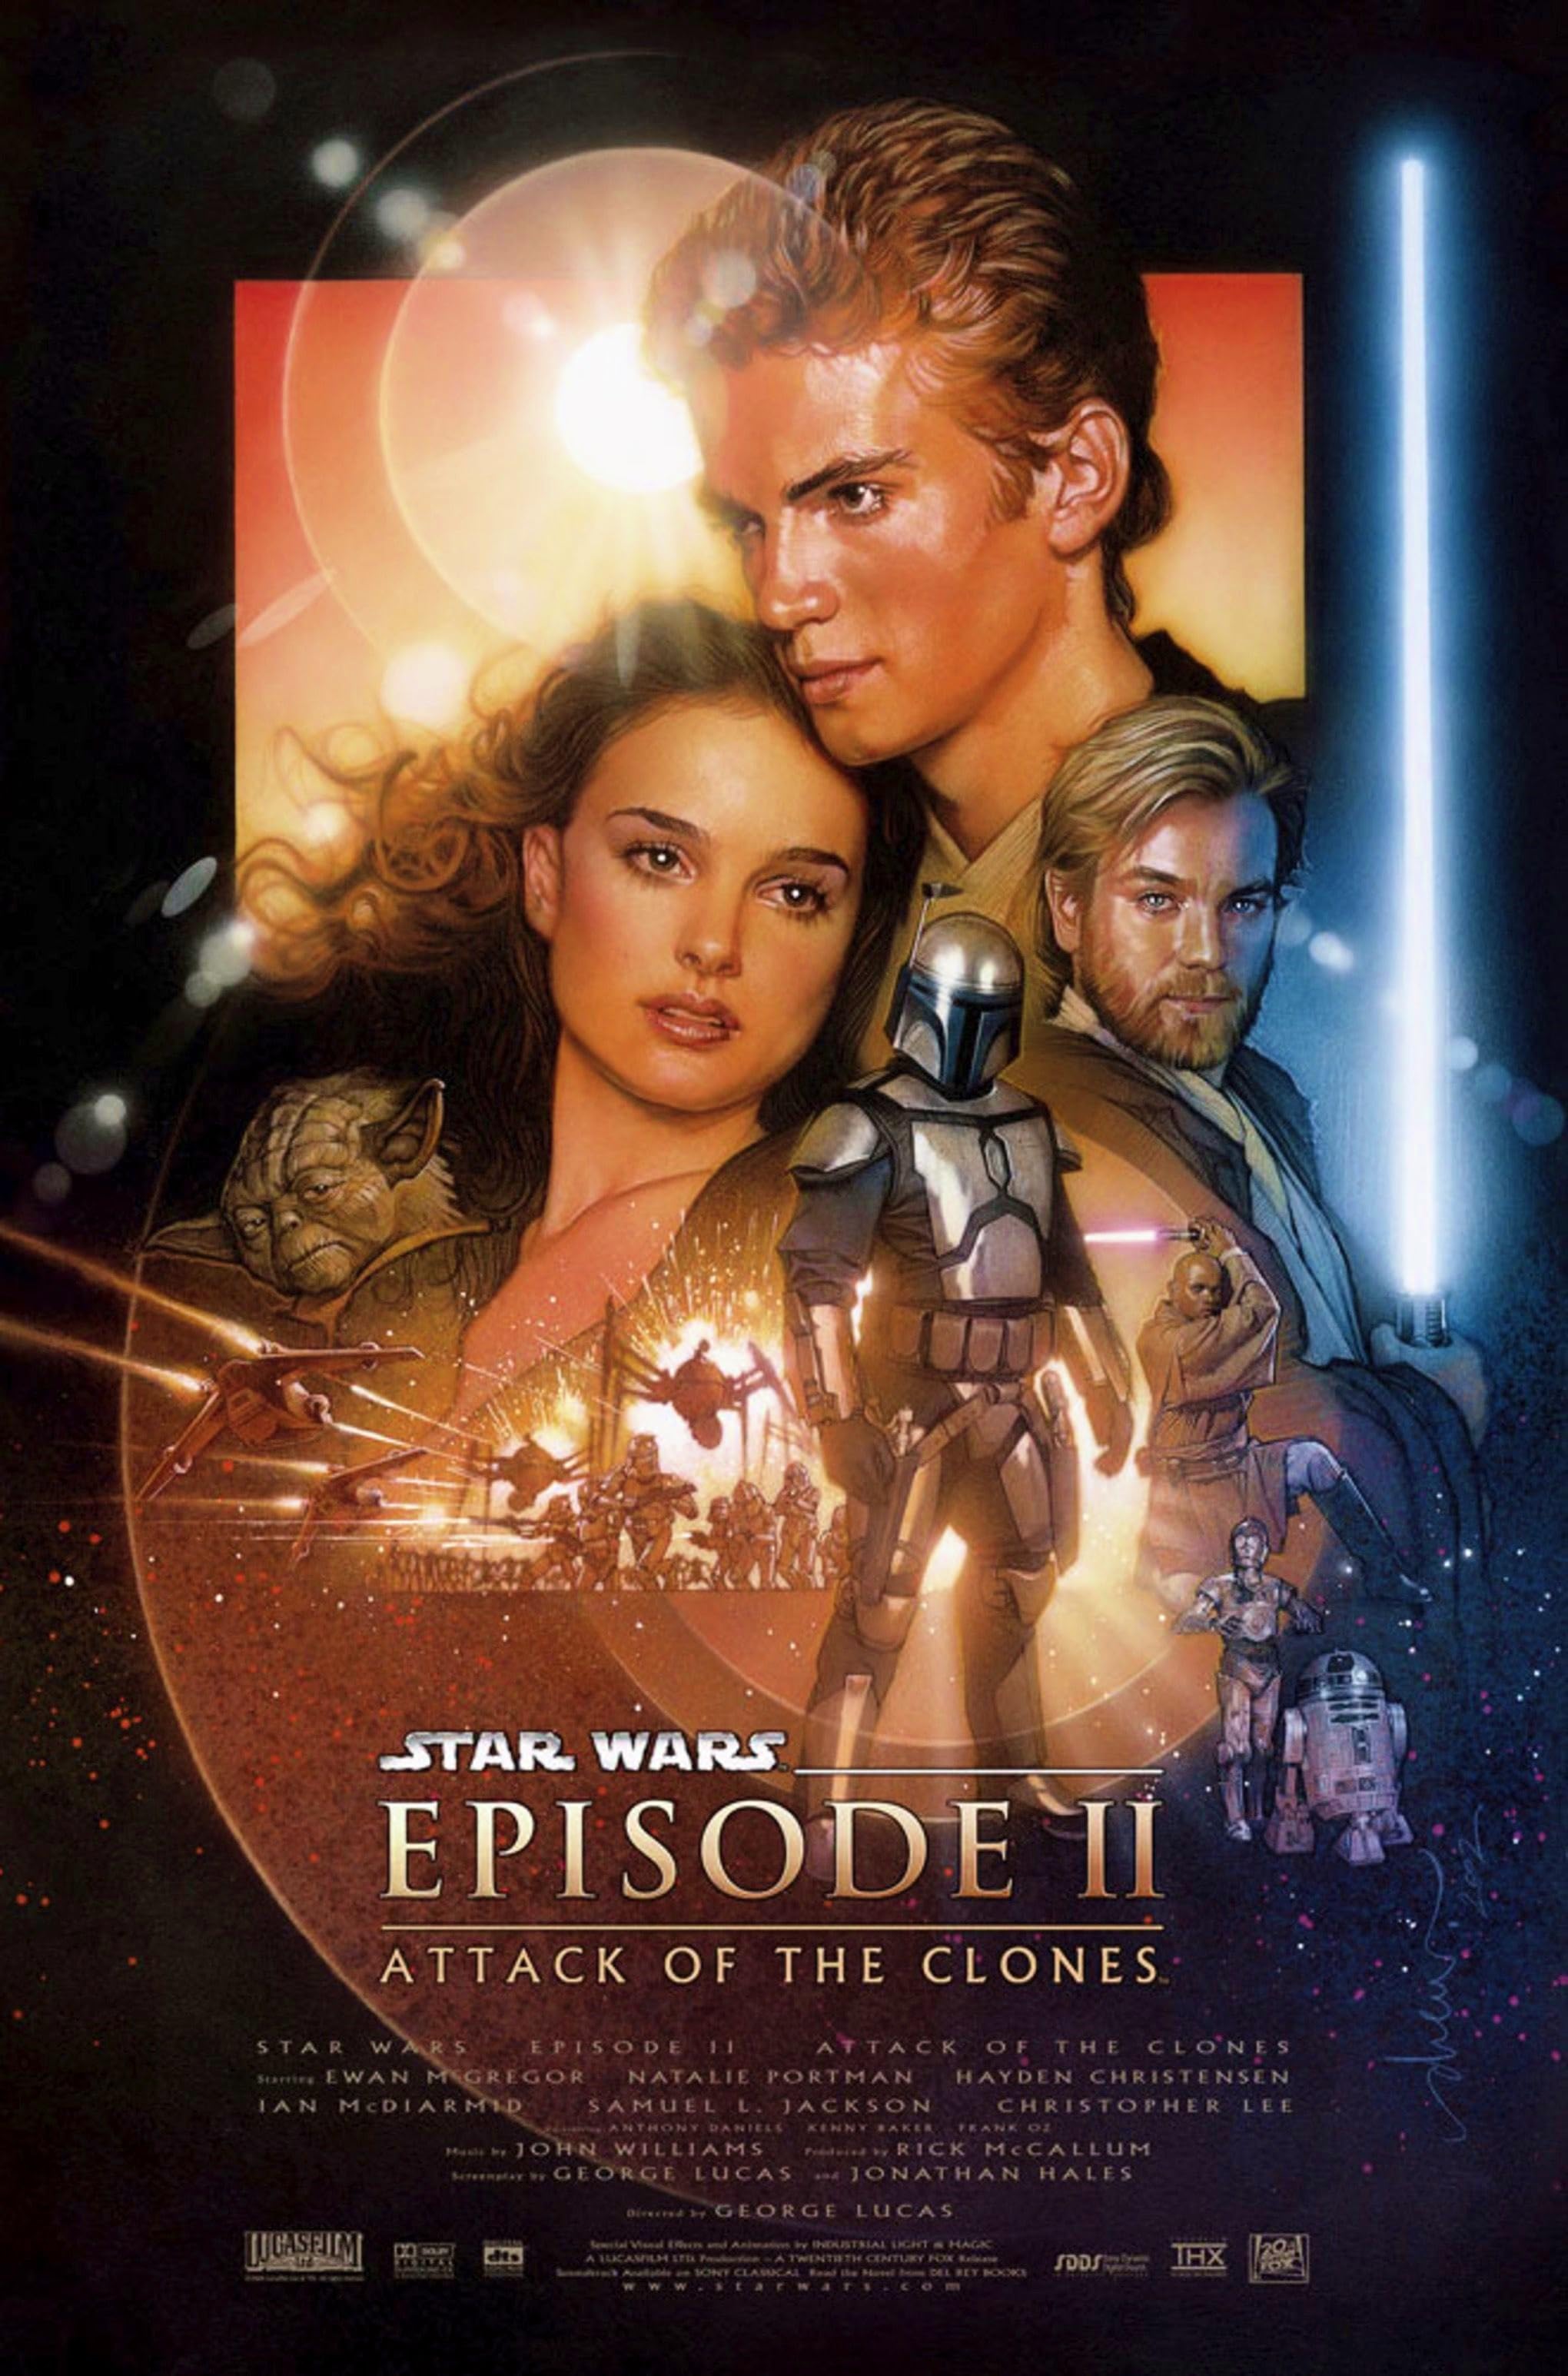 Star Wars - Episode II - Attack of the Clones - (2002 movie) poster